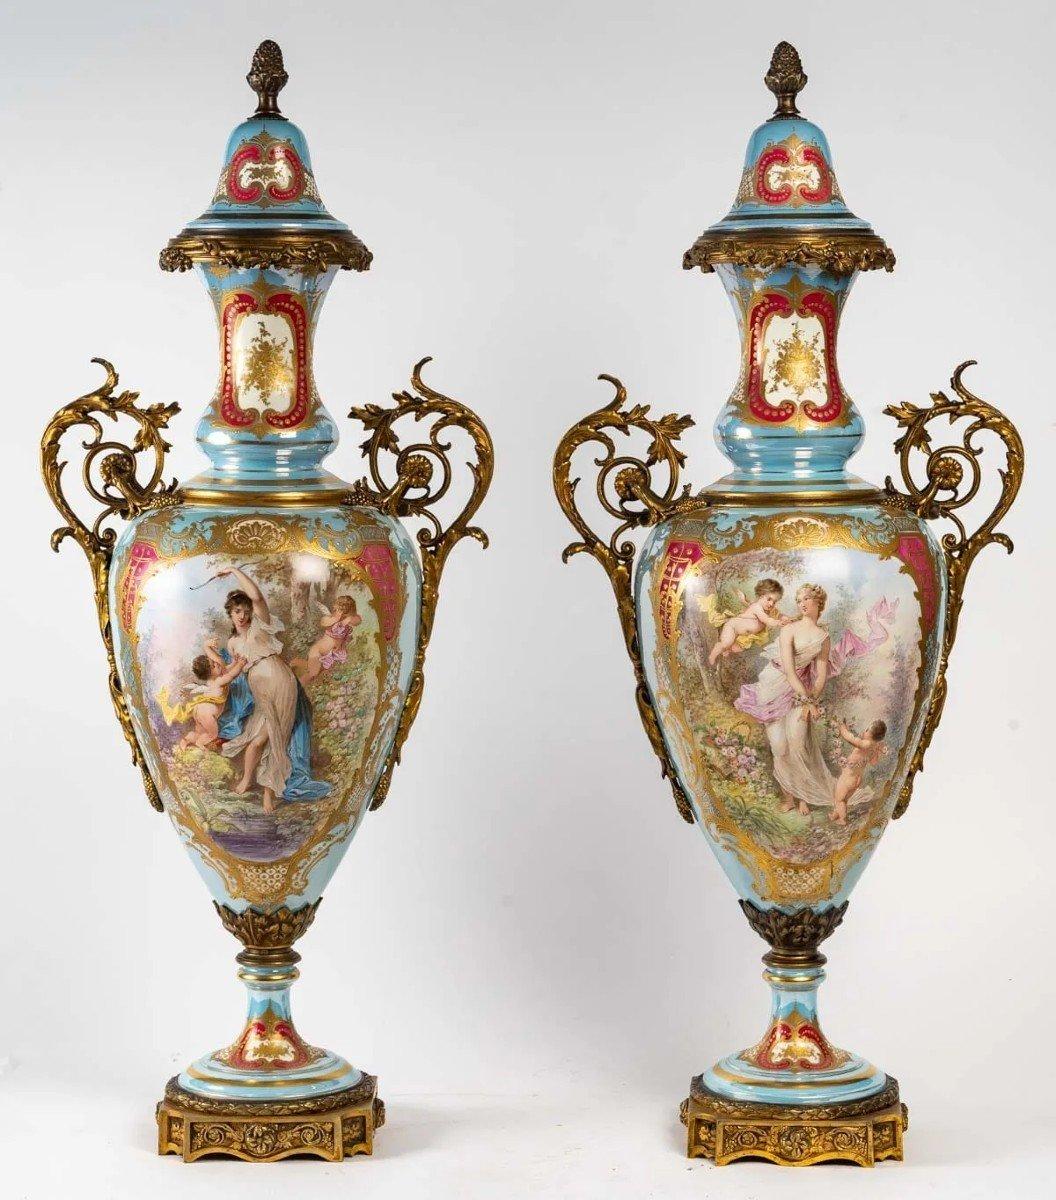 Very Important Pair of bright turquoise Sèvres Porcelain Vases, signed Sèvres
Very Important Pair of bright turquoise Sèvres Porcelain Vases, signed Sèvres and the name of the manufacturer. Decorated by paintings with gold around accentuated by the